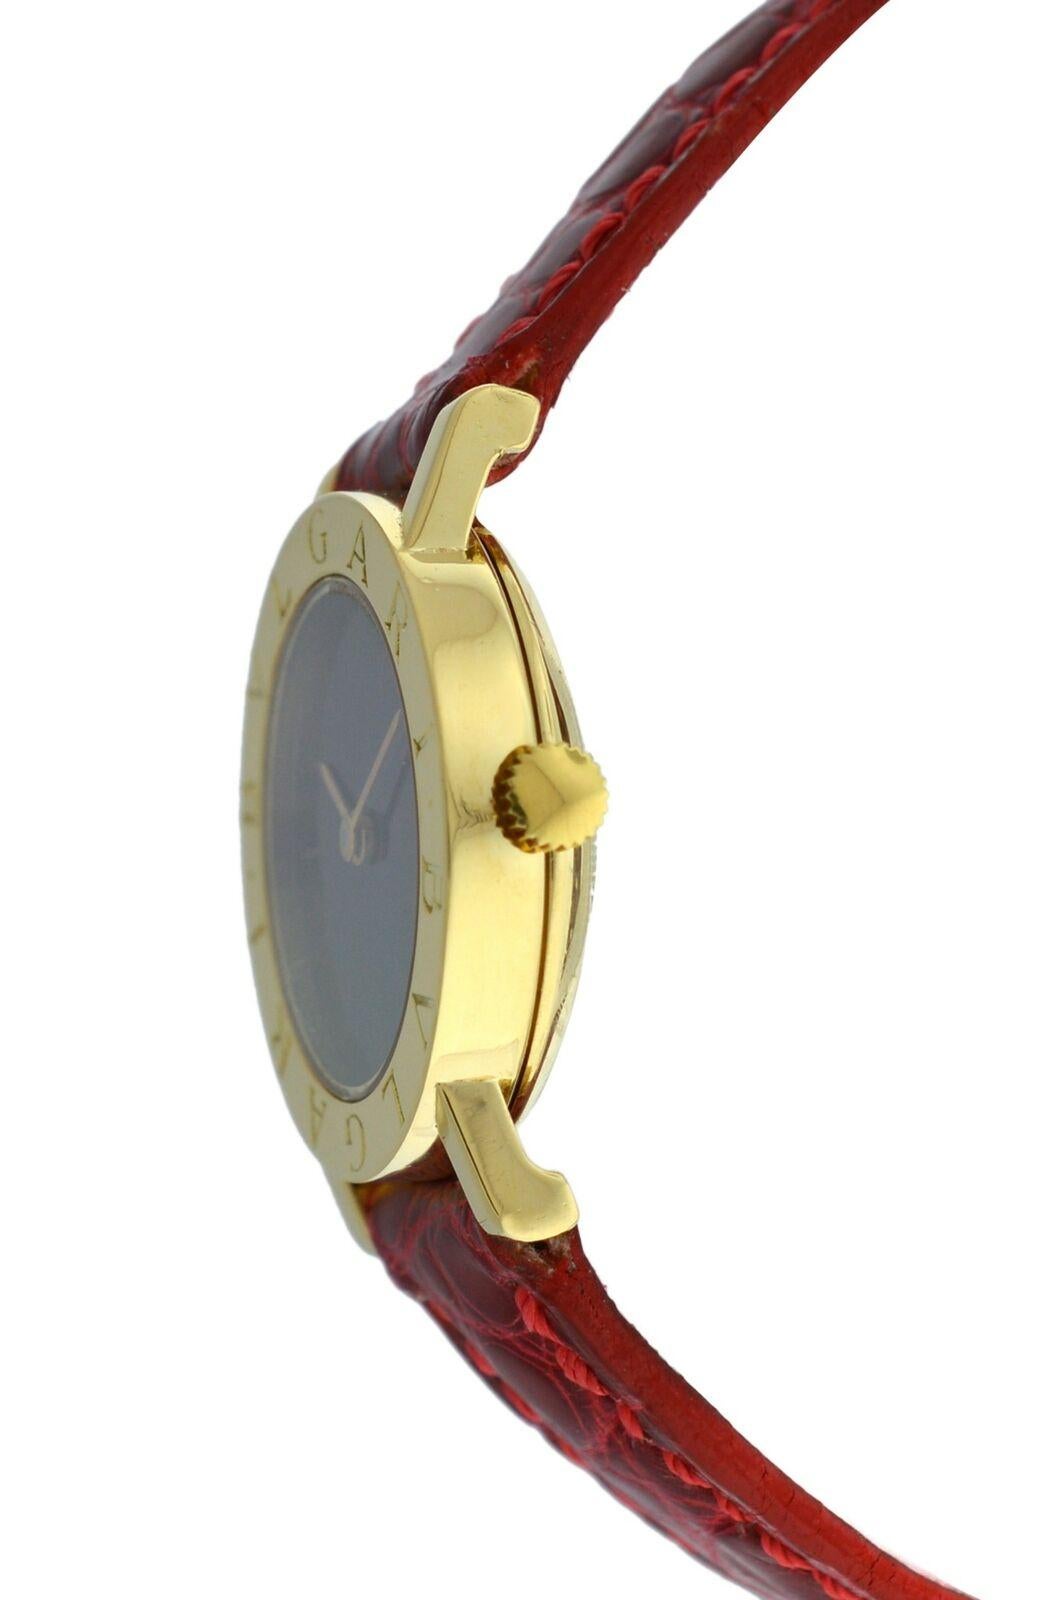 Brand	Bvlgari
Model	G1886.4 
Gender	Ladies
Condition	Pre-owned
Movement	Swiss Mechanical Manual Winding
Case Material	18K Gold
Bracelet / Strap Material	
Leather

Clasp / Buckle Material	
18K Gold	
Clasp Type	Tang
Bracelet / Strap width	12 mm at